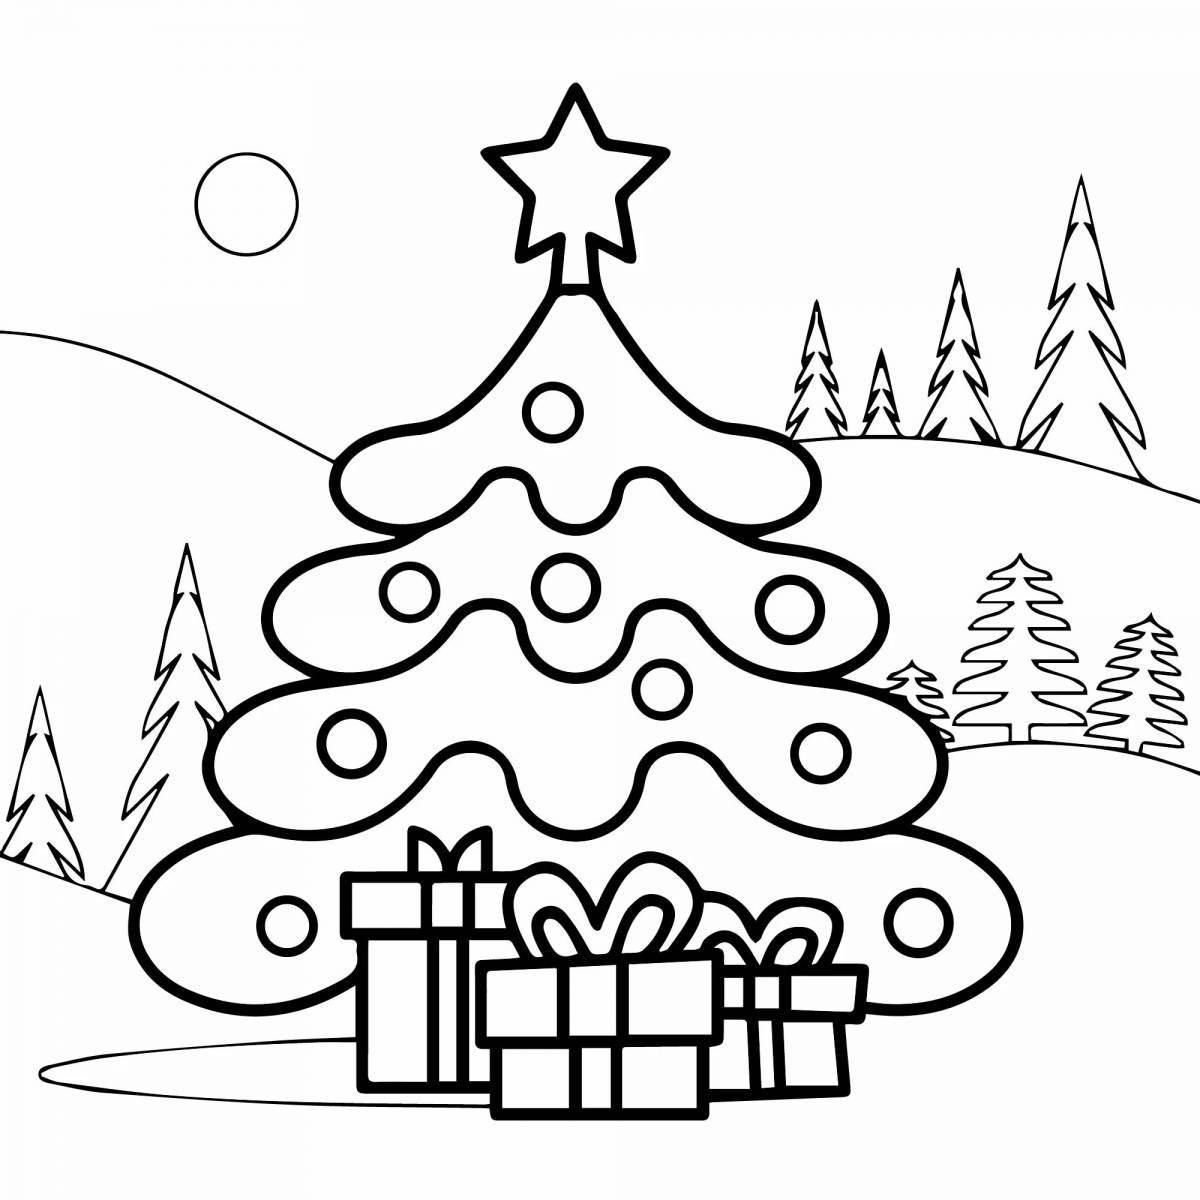 Great Christmas tree coloring book for 4-5 year olds